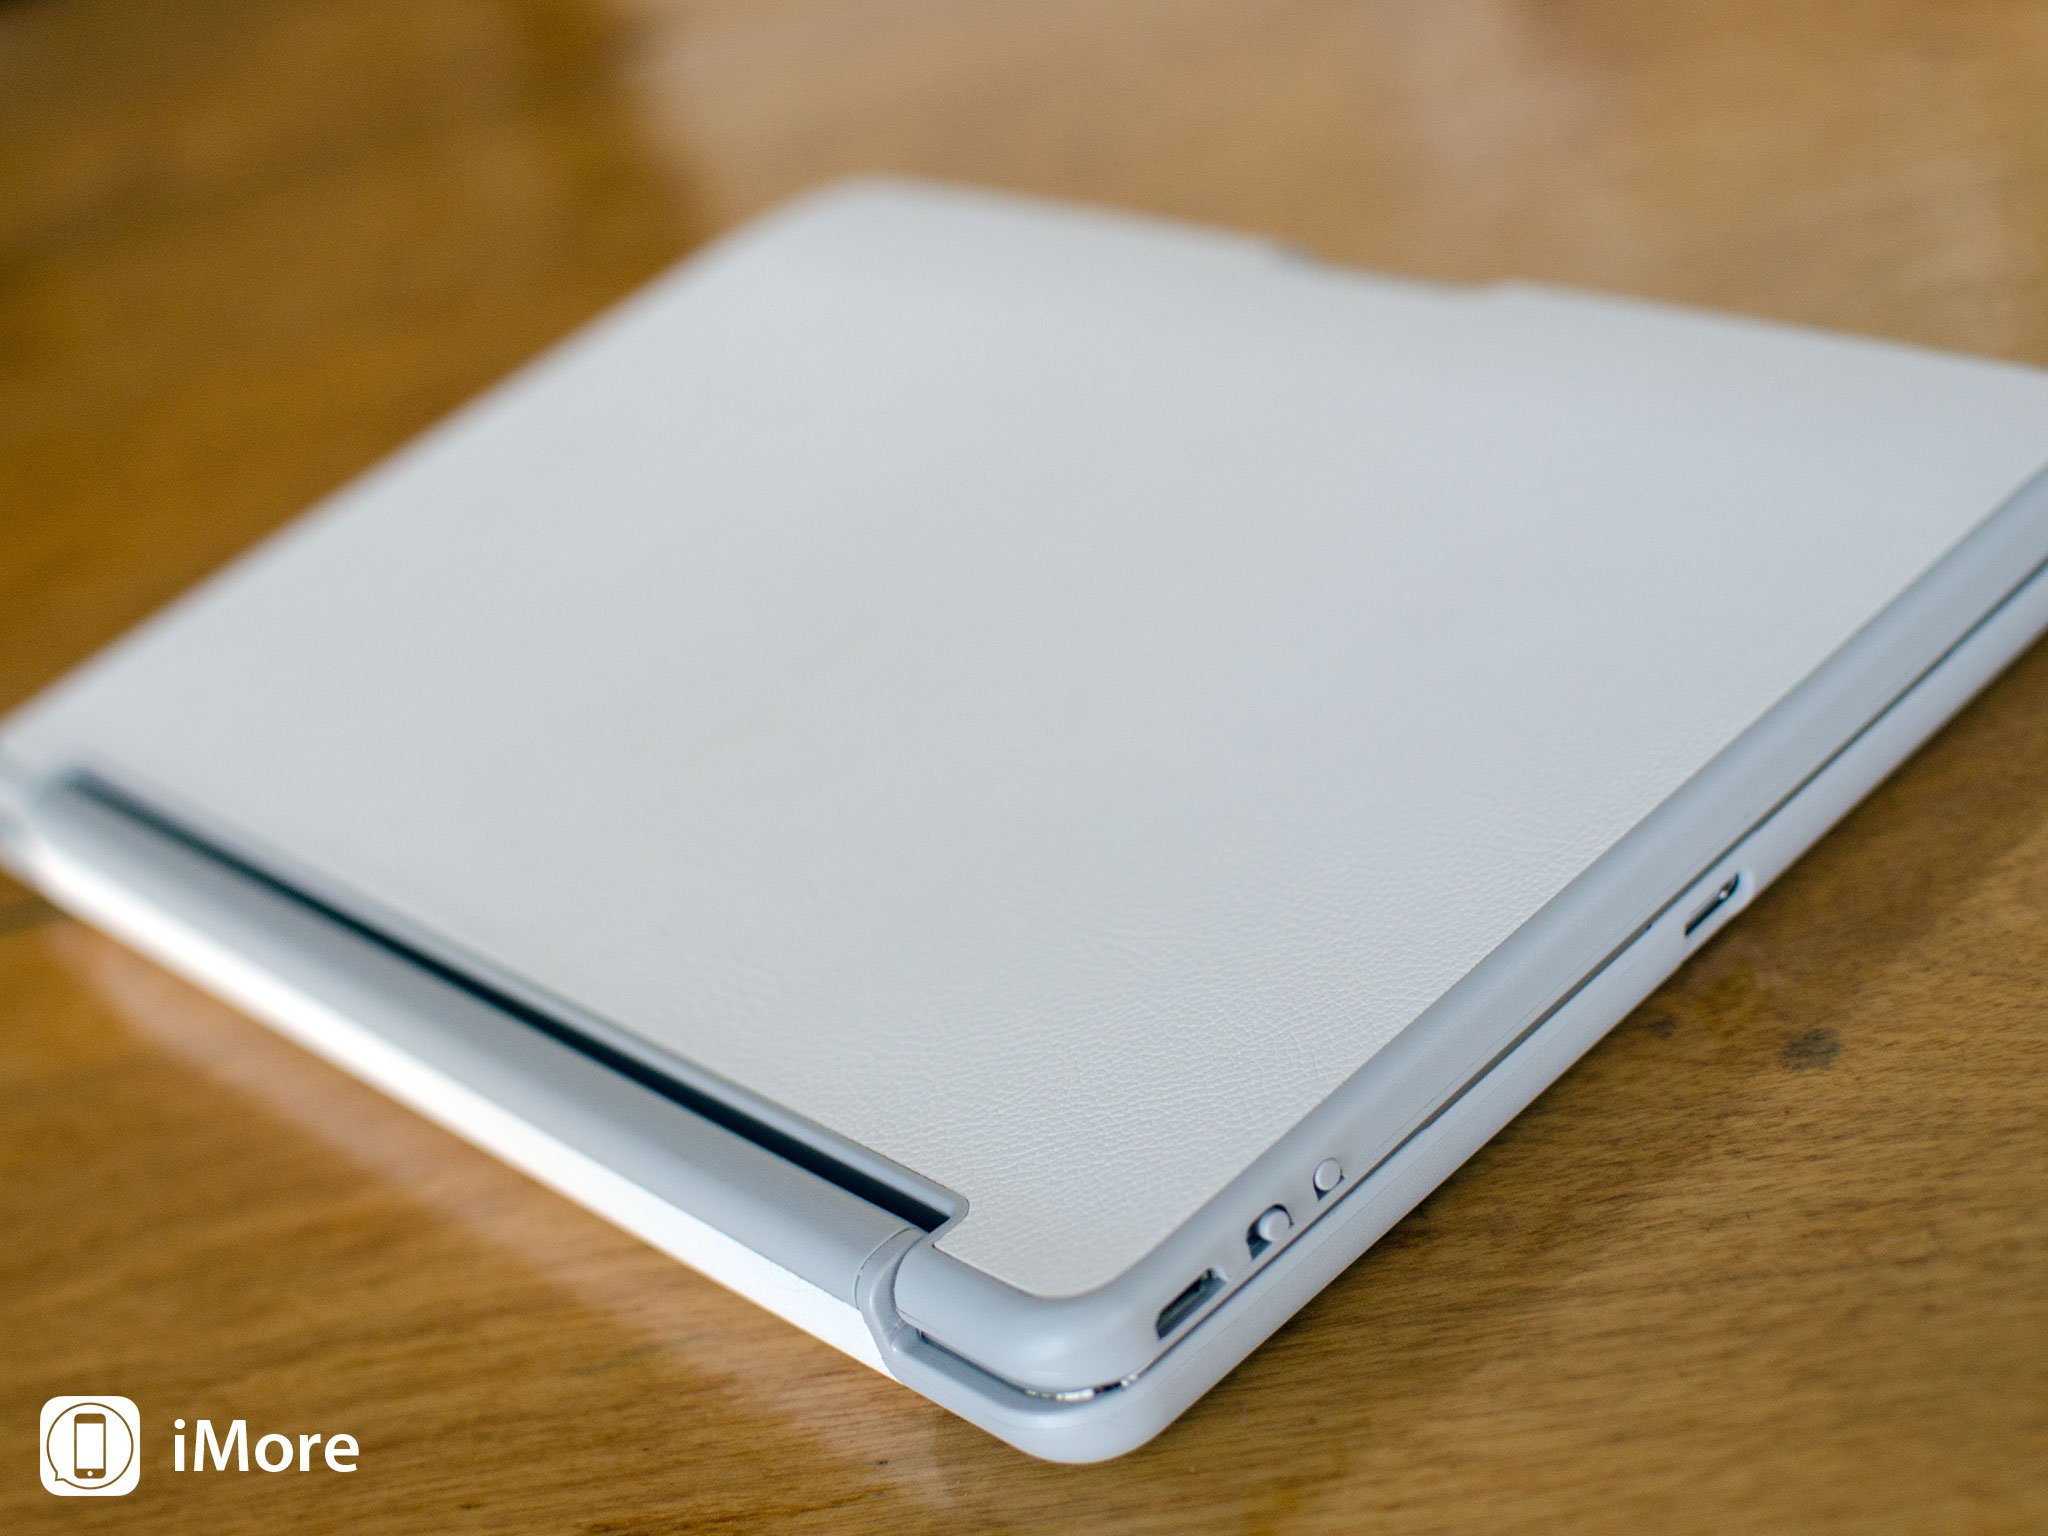 Zagg Keys Folio for iPad Air review: Closed top view